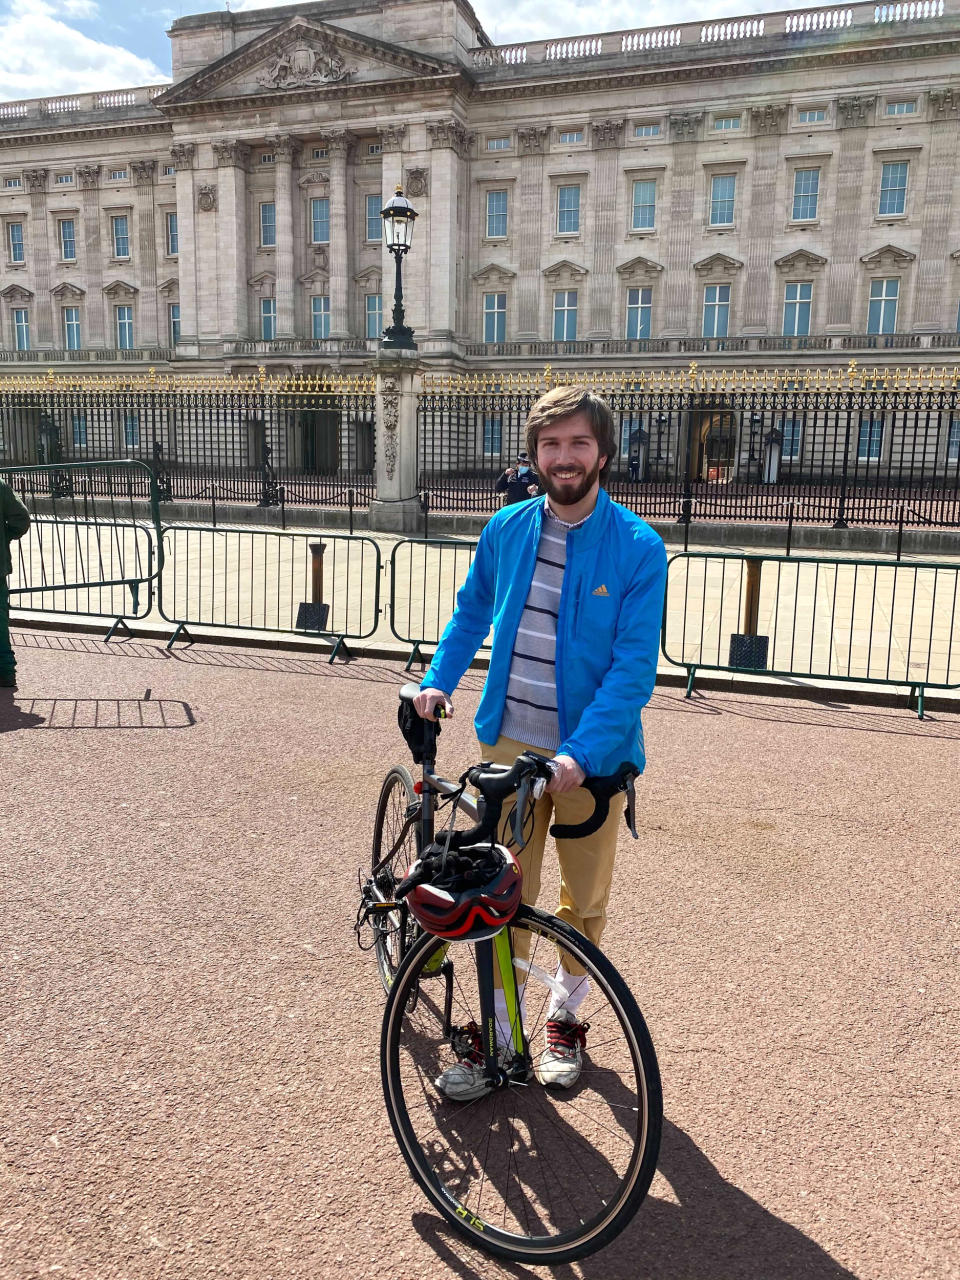 John Coverdale, 30, who cycled on his lunch break to witness the significant moment in Britain's national life. (Saphora Smith / NBC News)